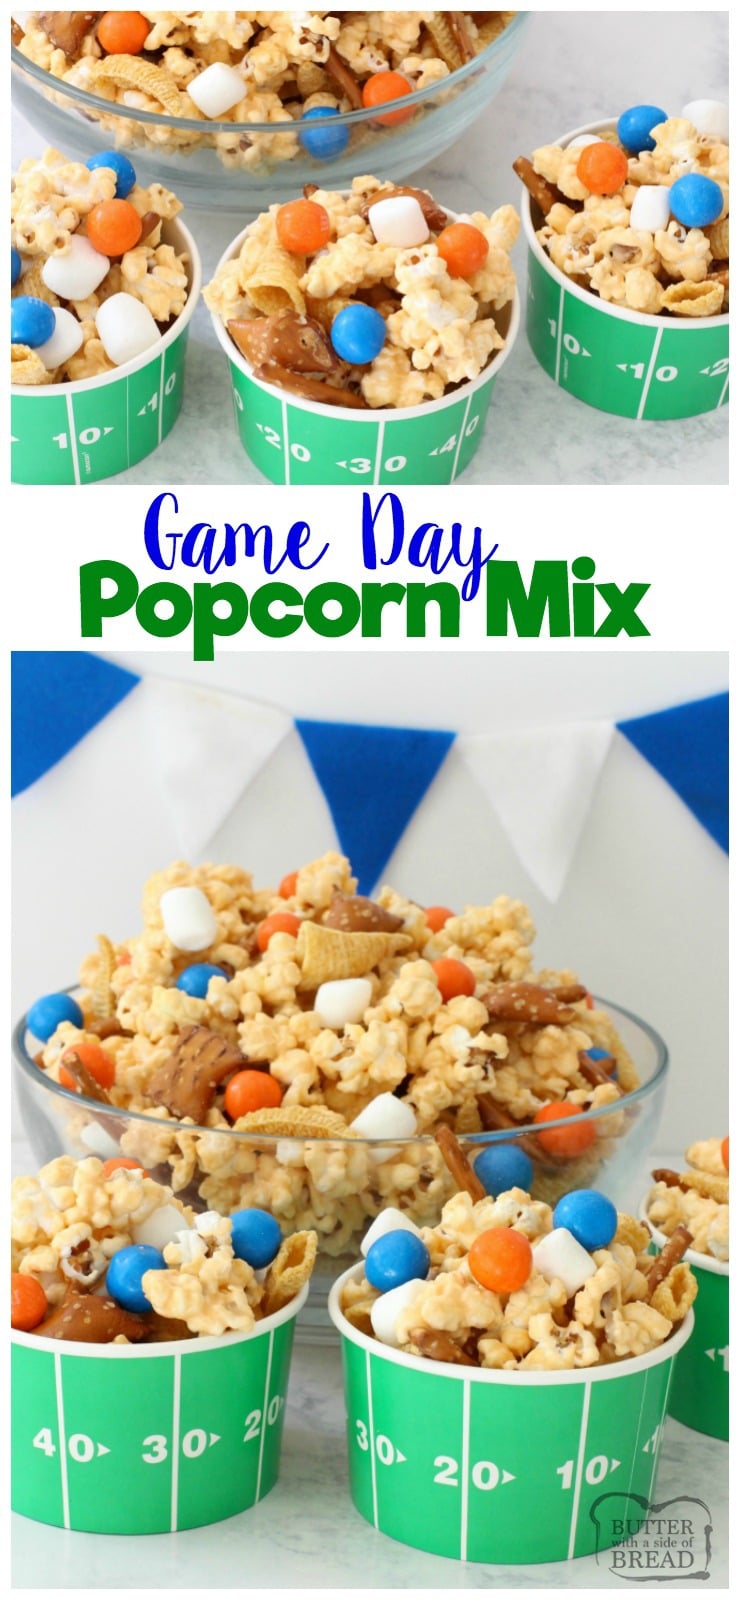 Gameday Popcorn Mix is sweet, salty, and perfect for your crowd of excited sports fans (especially when you easily customize it to your team's colors)! #popcornrecipe 